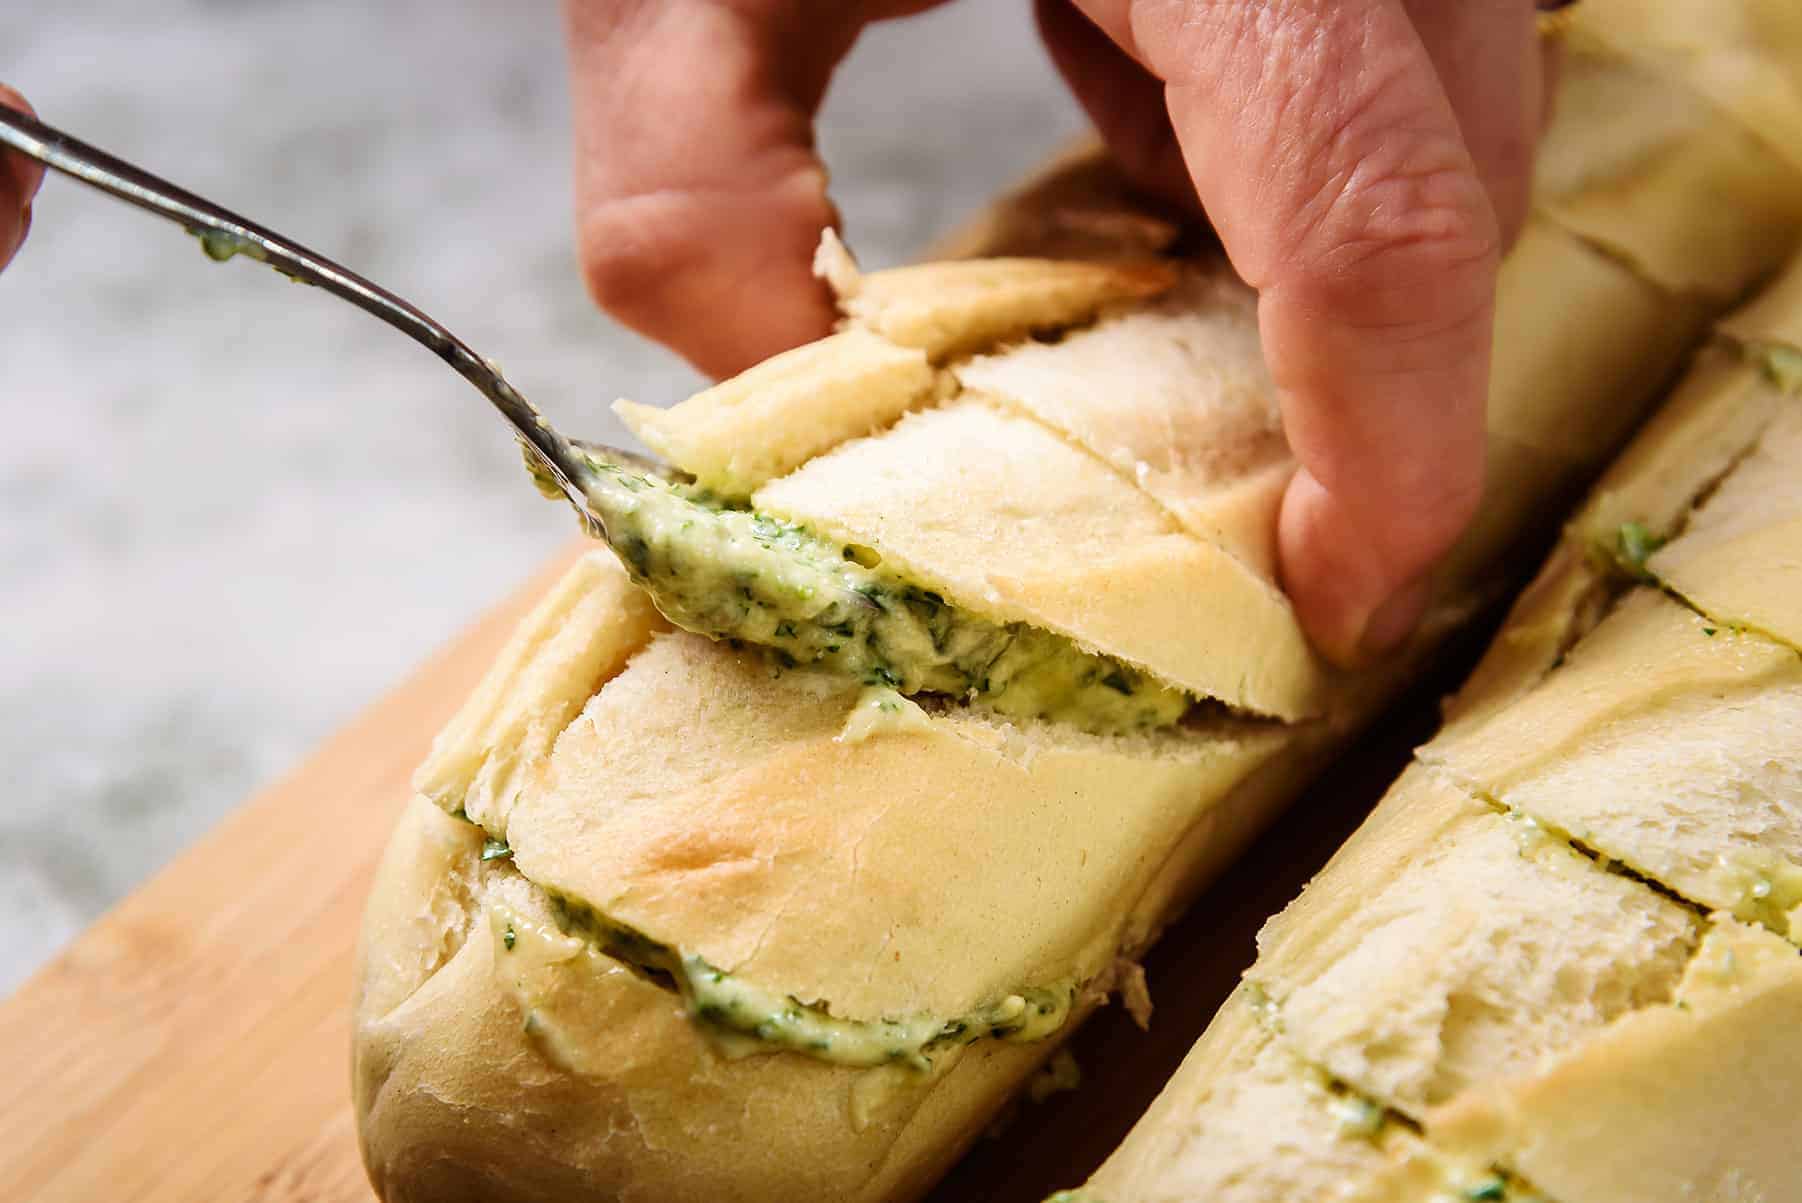 Placing the garlic butter in the baguette slices